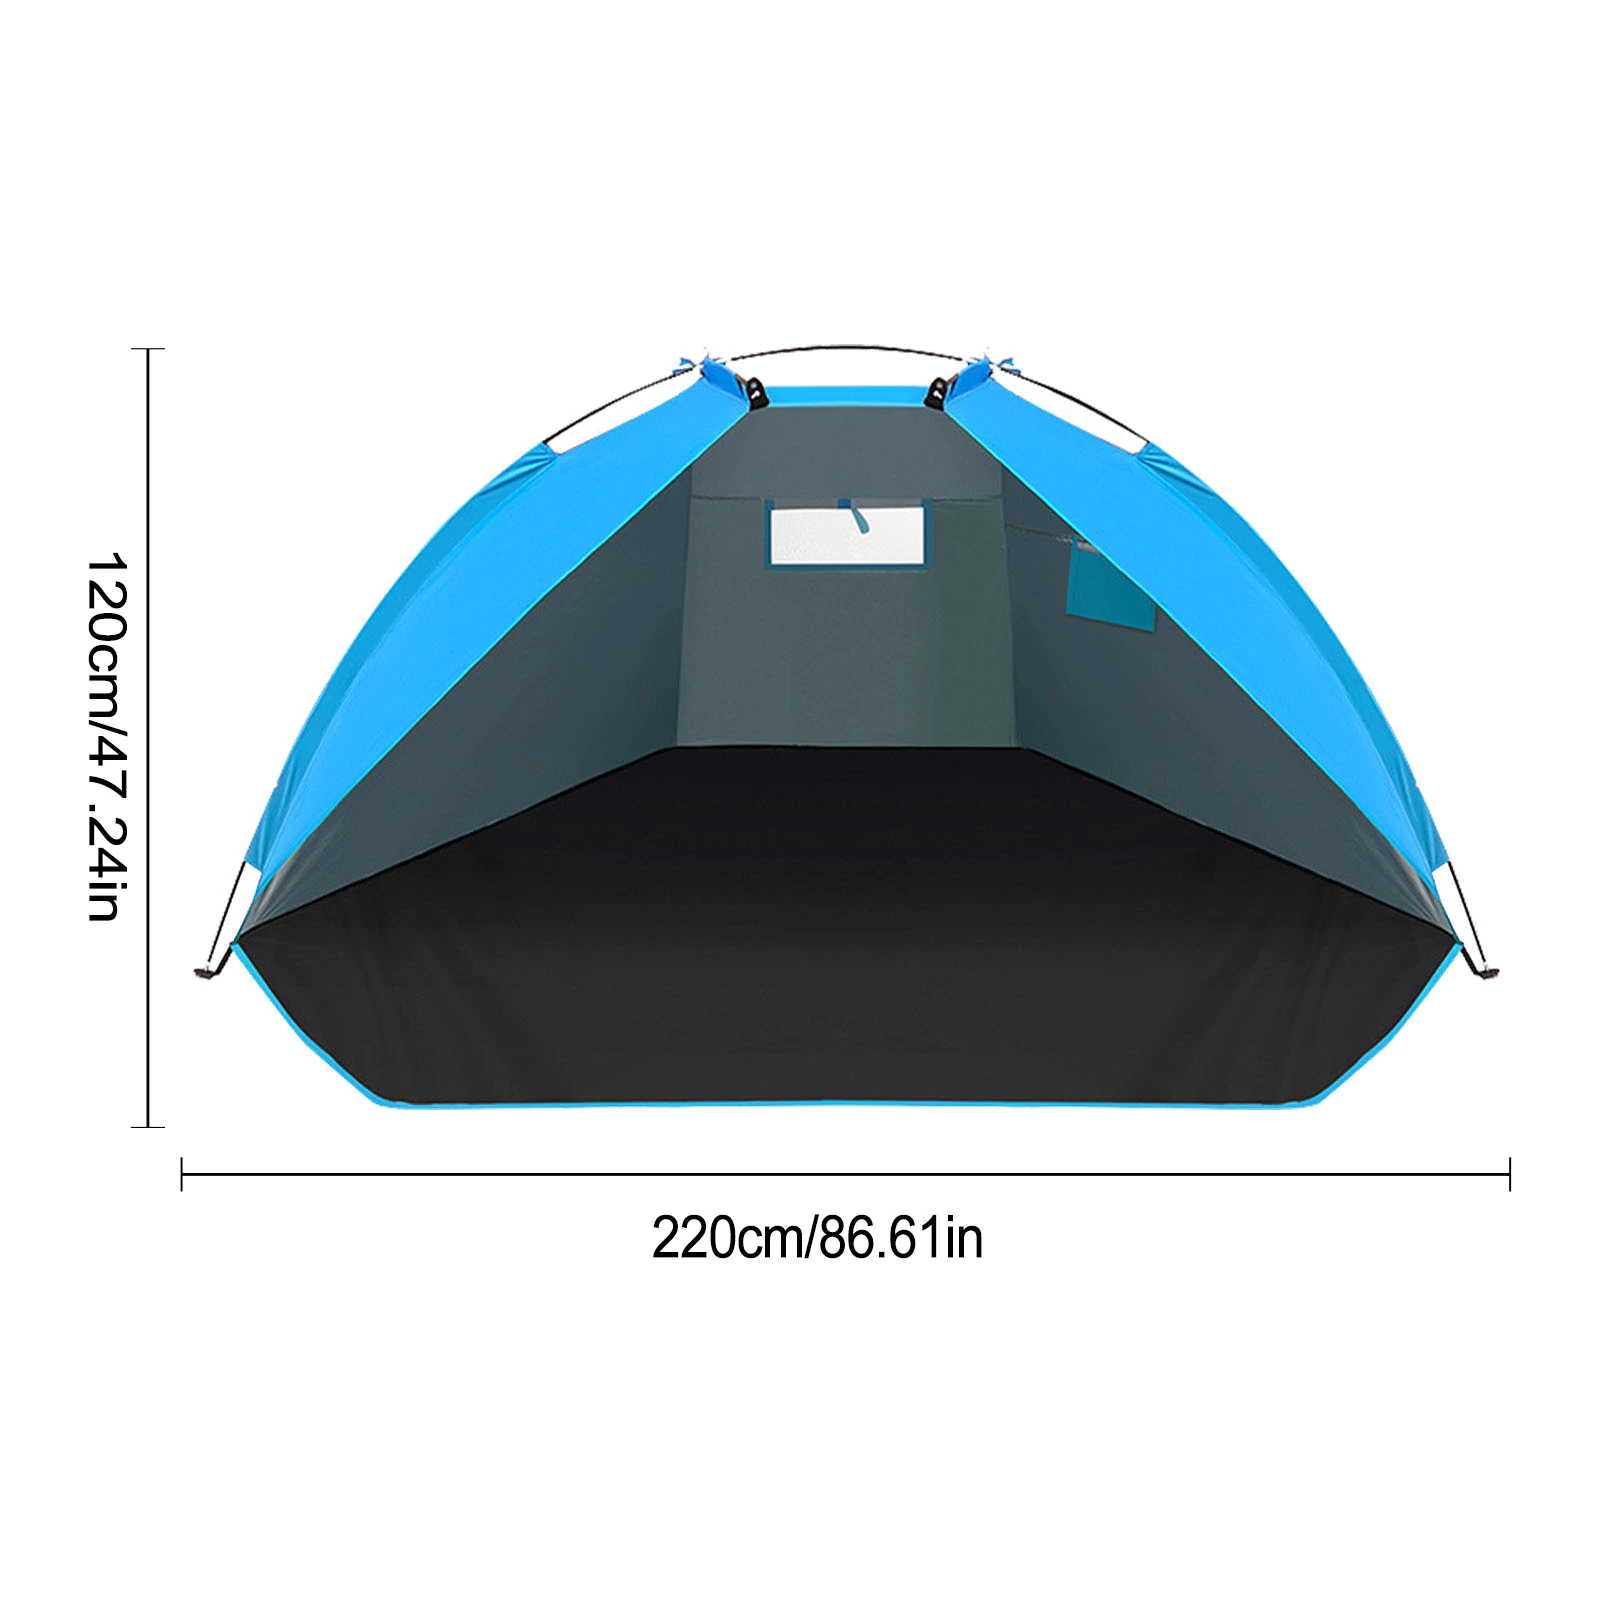 Cheap Goat Tents Pop Up Camping Tent Beach Tent For Large Family Outdoor Beach Tent And Anti UV Portable Sun Shade Shelter With Carrying Bag Anti   